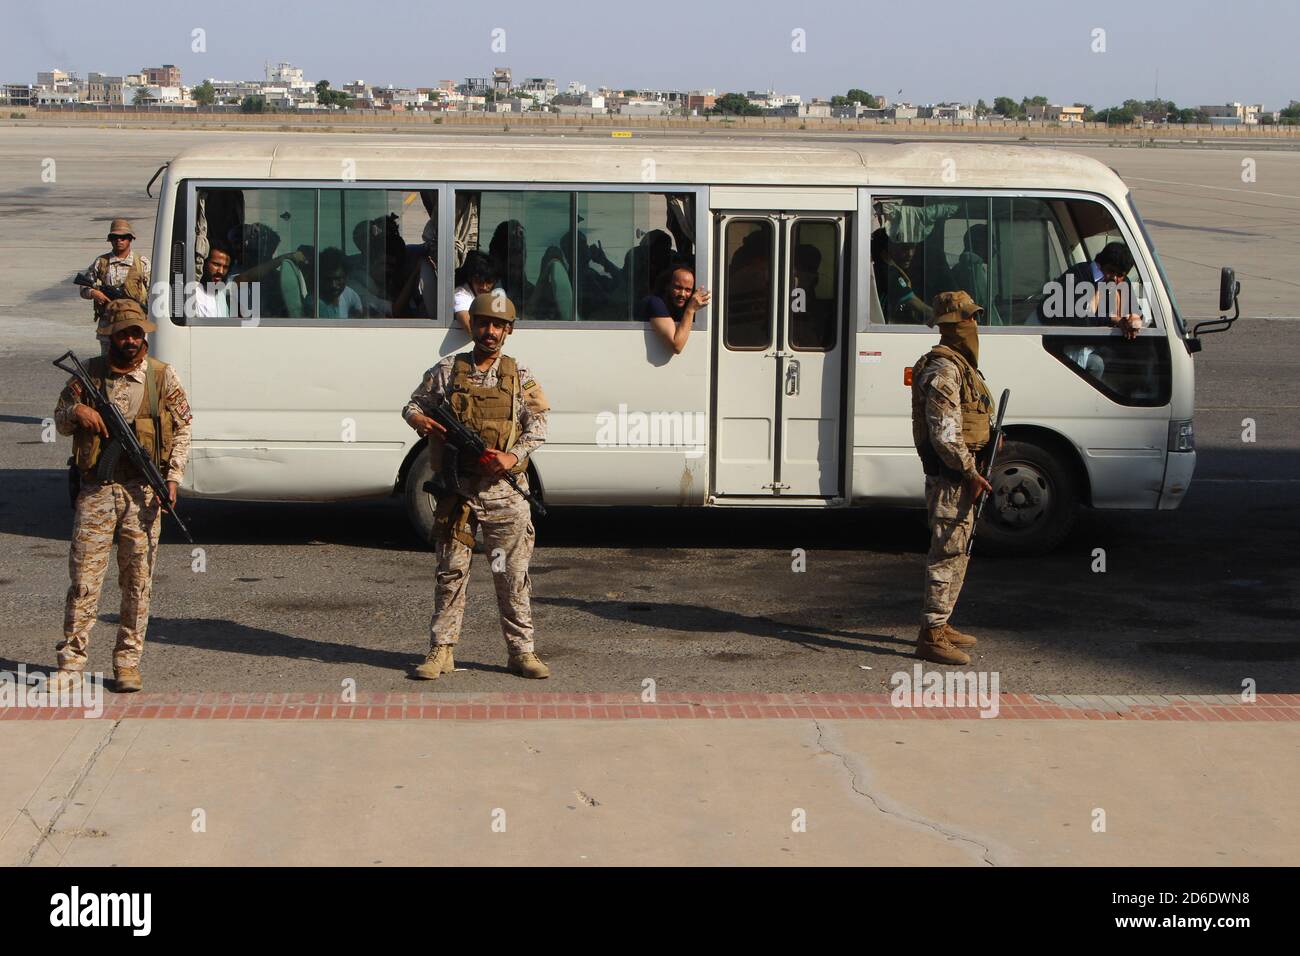 Aden, Yemen. 16th Oct, 2020. Saudi soldiers stand guard of a bus carrying Yemeni Houthi prisoners at an airport in the southern city of Aden, on the second day of a prisoner swap between the Yemeni government and the Houthi movement. More than 1,000 people detained in relation to the conflict in Yemen are to be transported back to their region of origin or to their home countries by The International Committee of the Red Cross (ICRC) in the largest operation of its kind during the five-and-a-half-year war. Credit: Wail Shaif/dpa/Alamy Live News Stock Photo